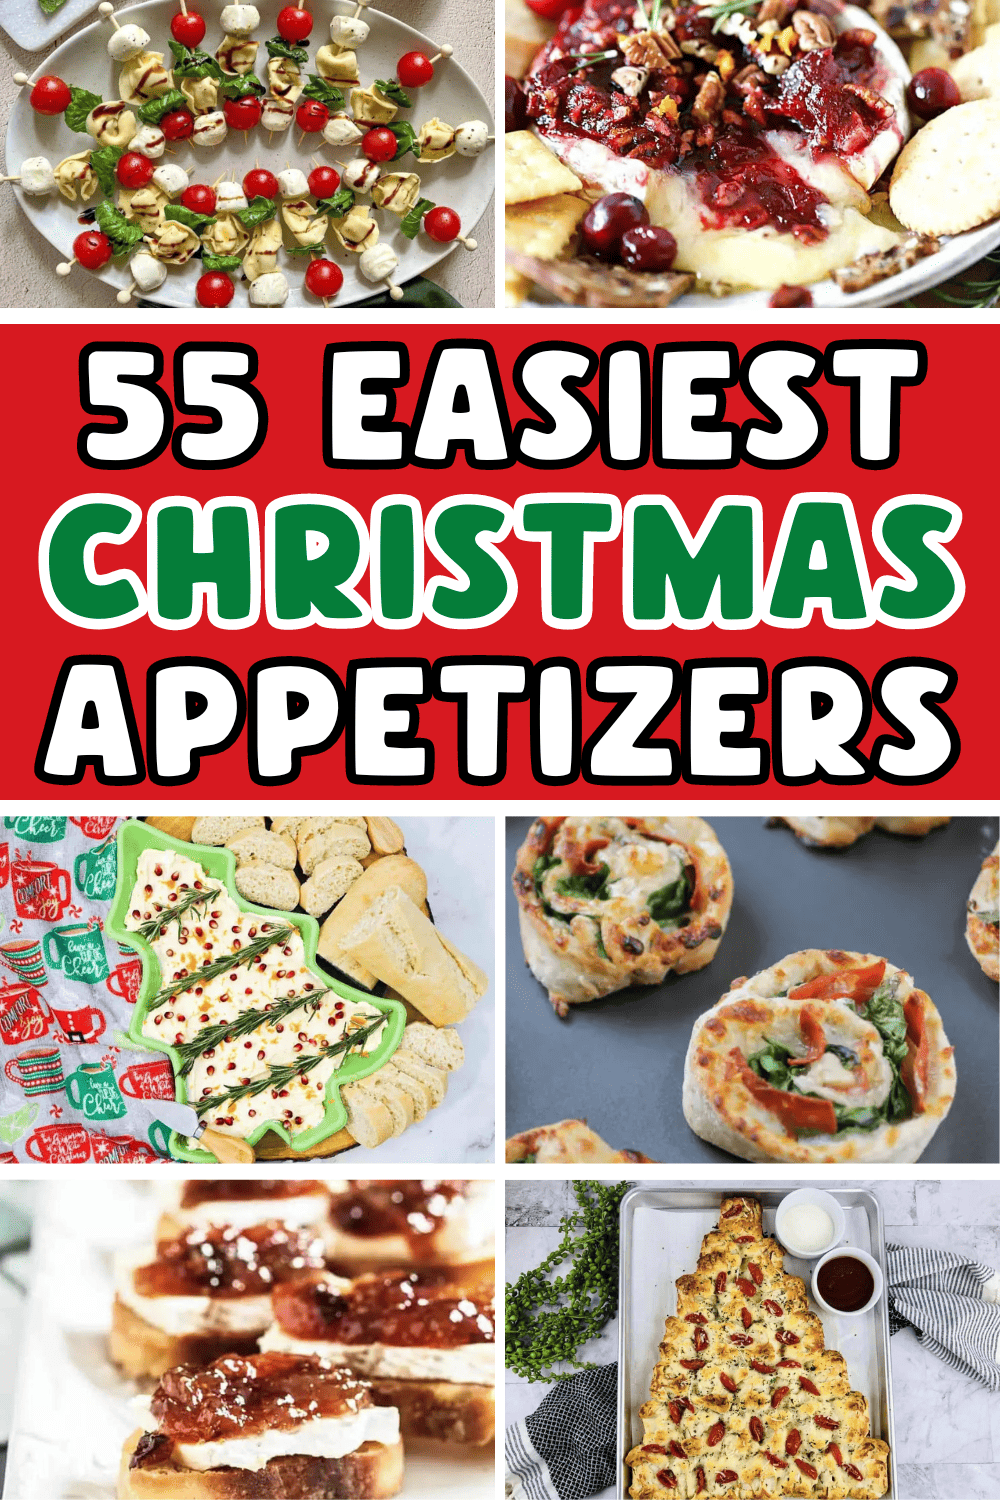 Quick and easy holiday appetizers! These quick and easy christmas party appetizers, easy appetizers for Christmas party appetizer ideas, easy christmas eve appetizer ideas, best christmas appetizers holidays simple, cute christmas appetizers easy, christmas party menu ideas appetizers easy, christmas snack food ideas easy, best christmas appetizers easy homemade, christmas horderves appetizers easy, easy xmas food ideas, christmas dinner ideas appetizers easy, christmas potluck ideas appetizers.